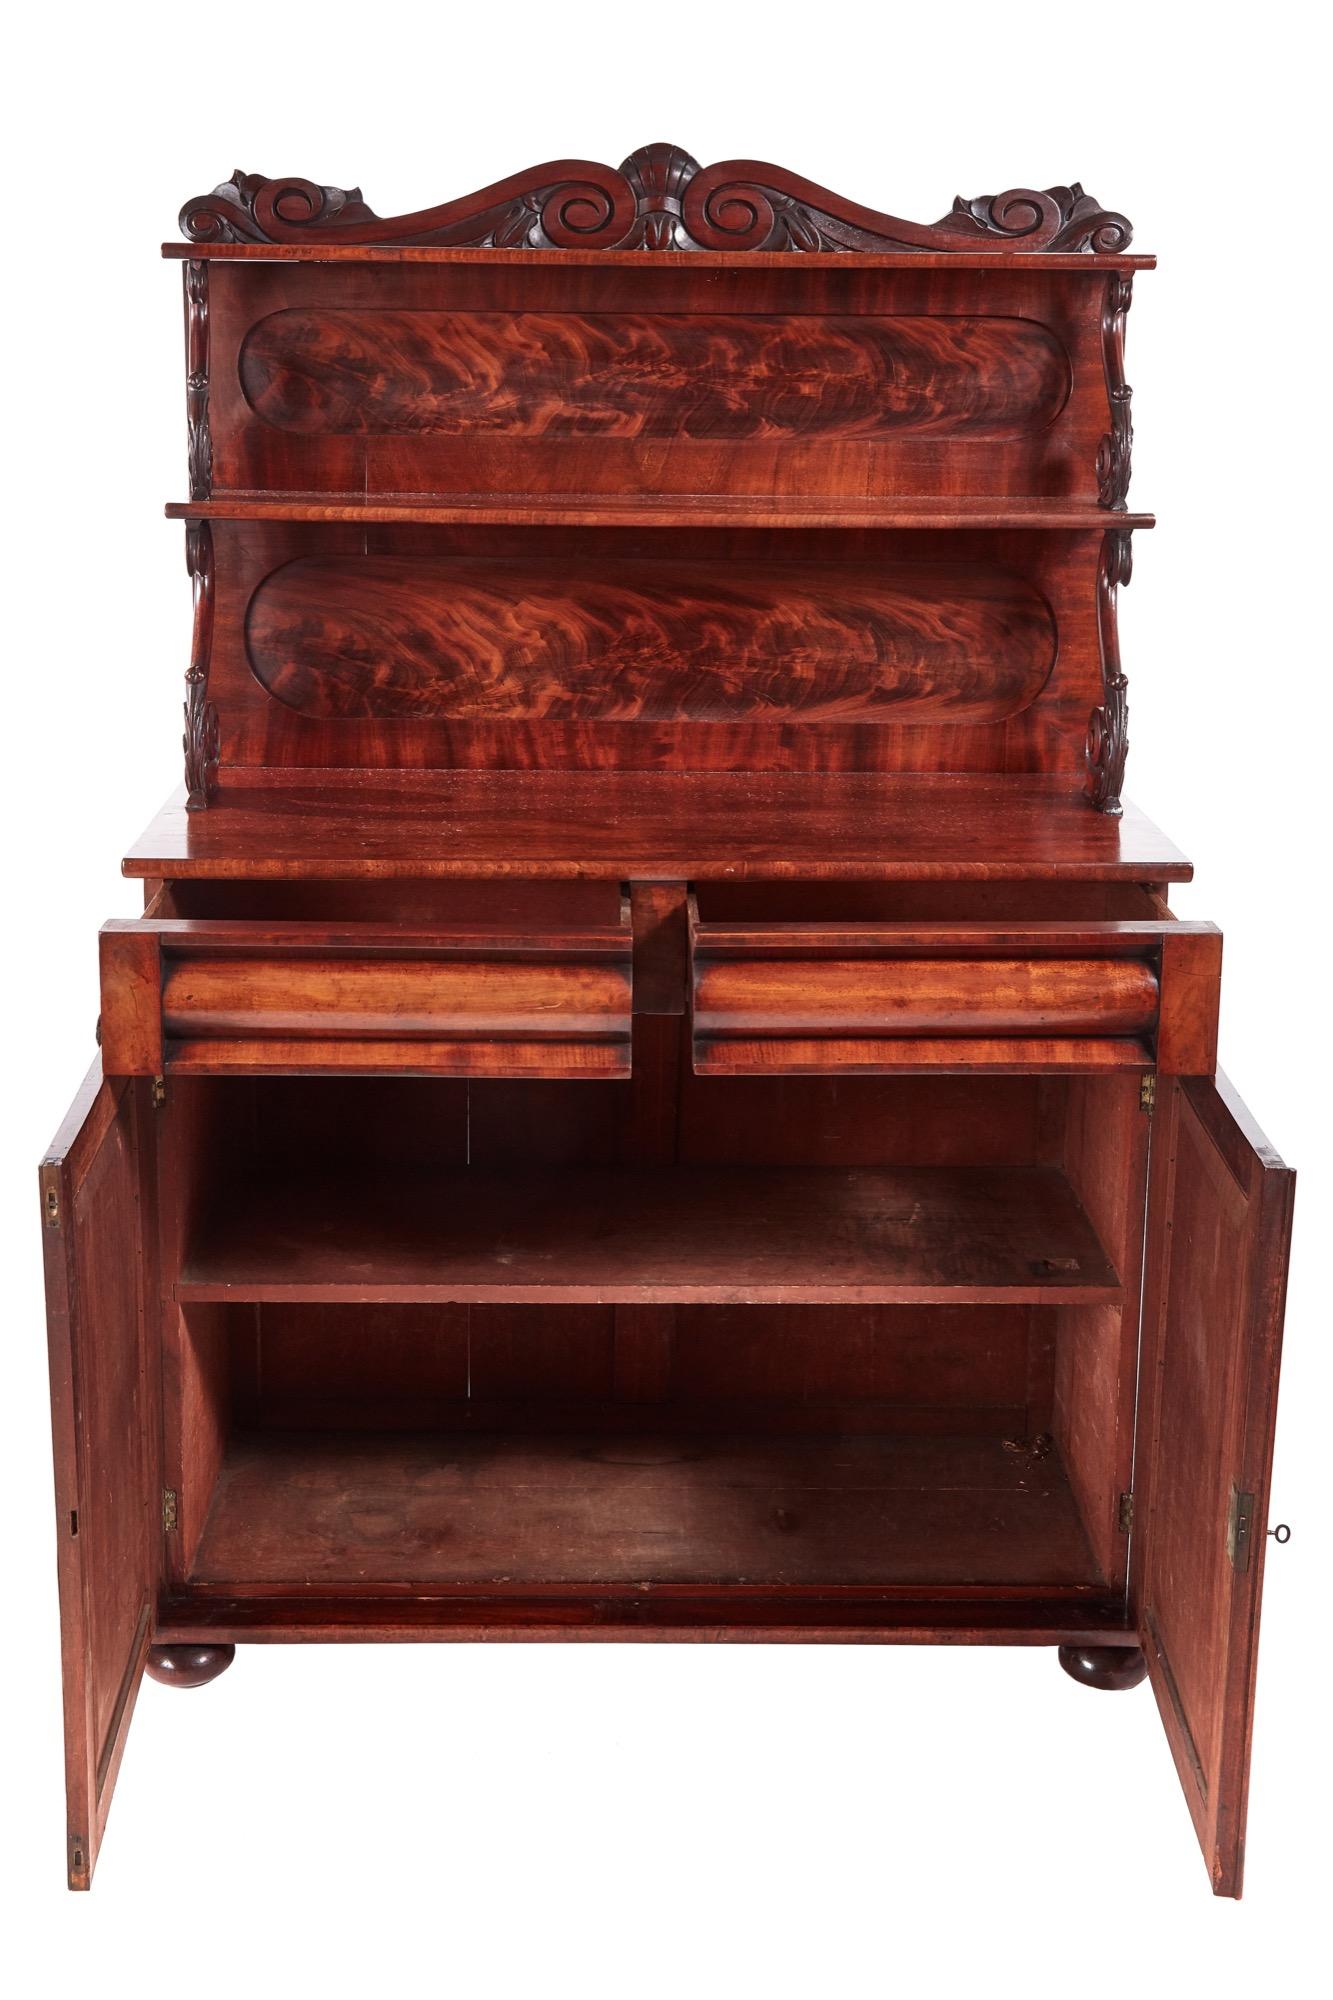 Fine Regency antique carved mahogany chiffonier, beautifully carved back with two shelves and carefully carved attractive supports. The base has two shaped frieze drawers with two flame mahogany doors with arced panels, pretty carved corbels, one